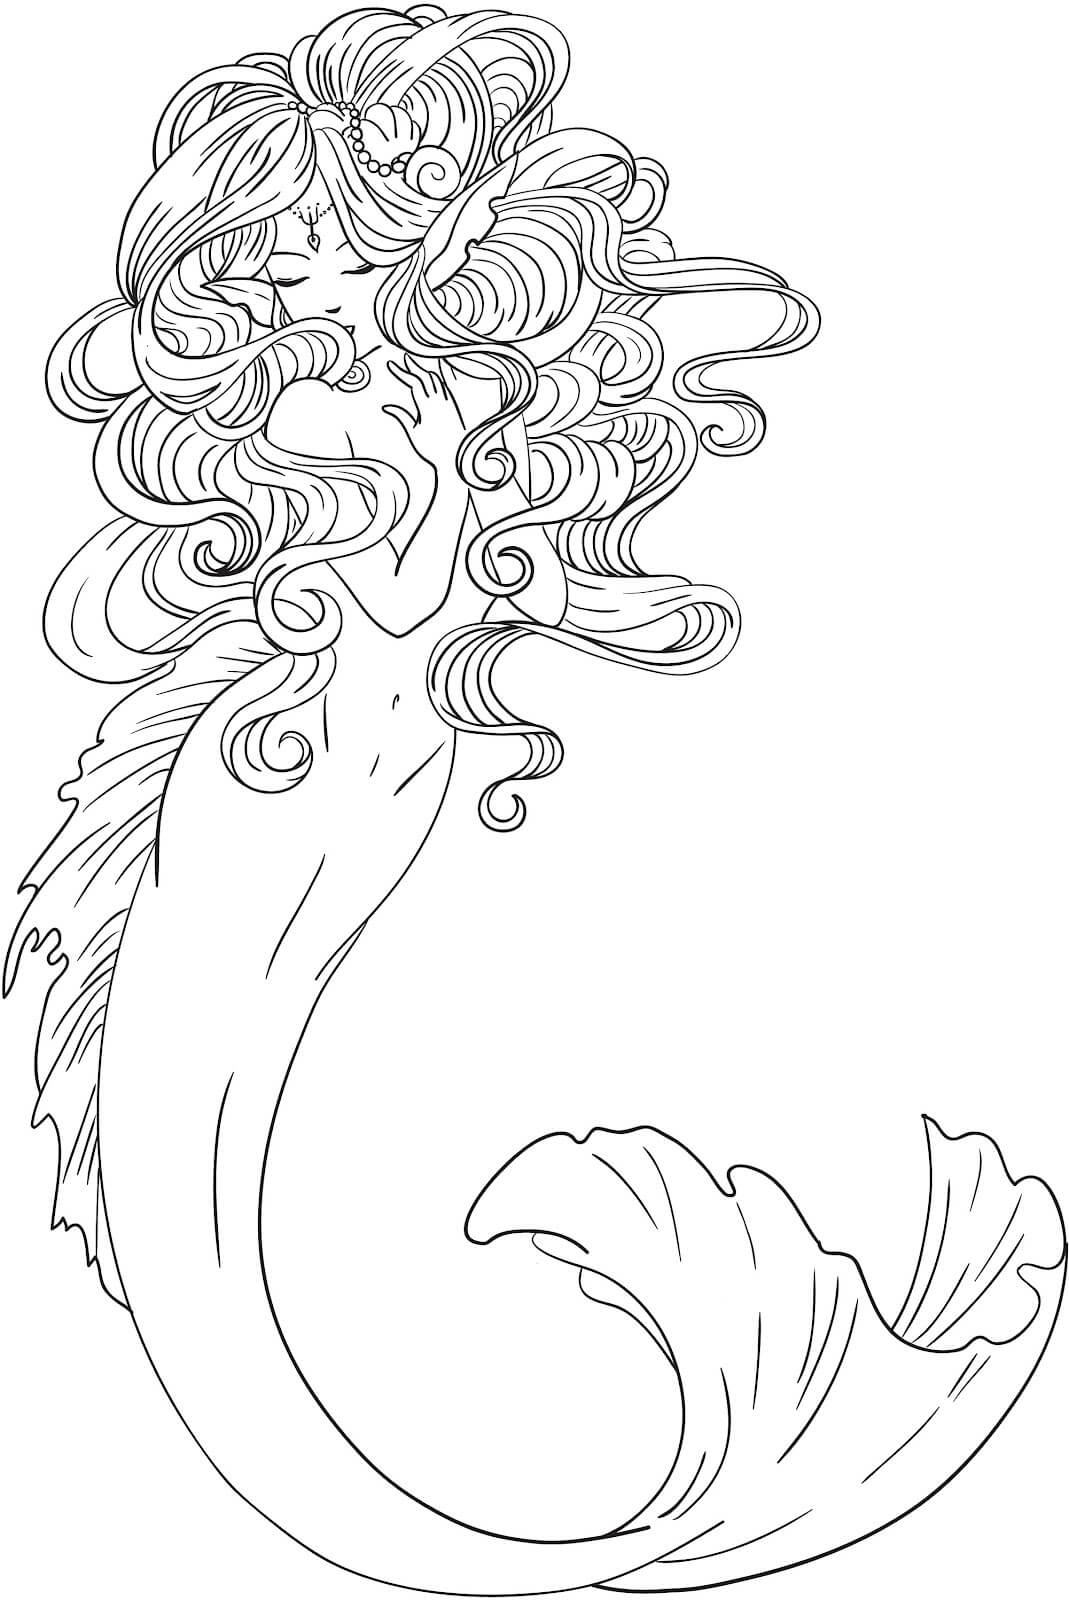 Adult Coloring Pages Mermaids Free Coloring Page Coloring Pages